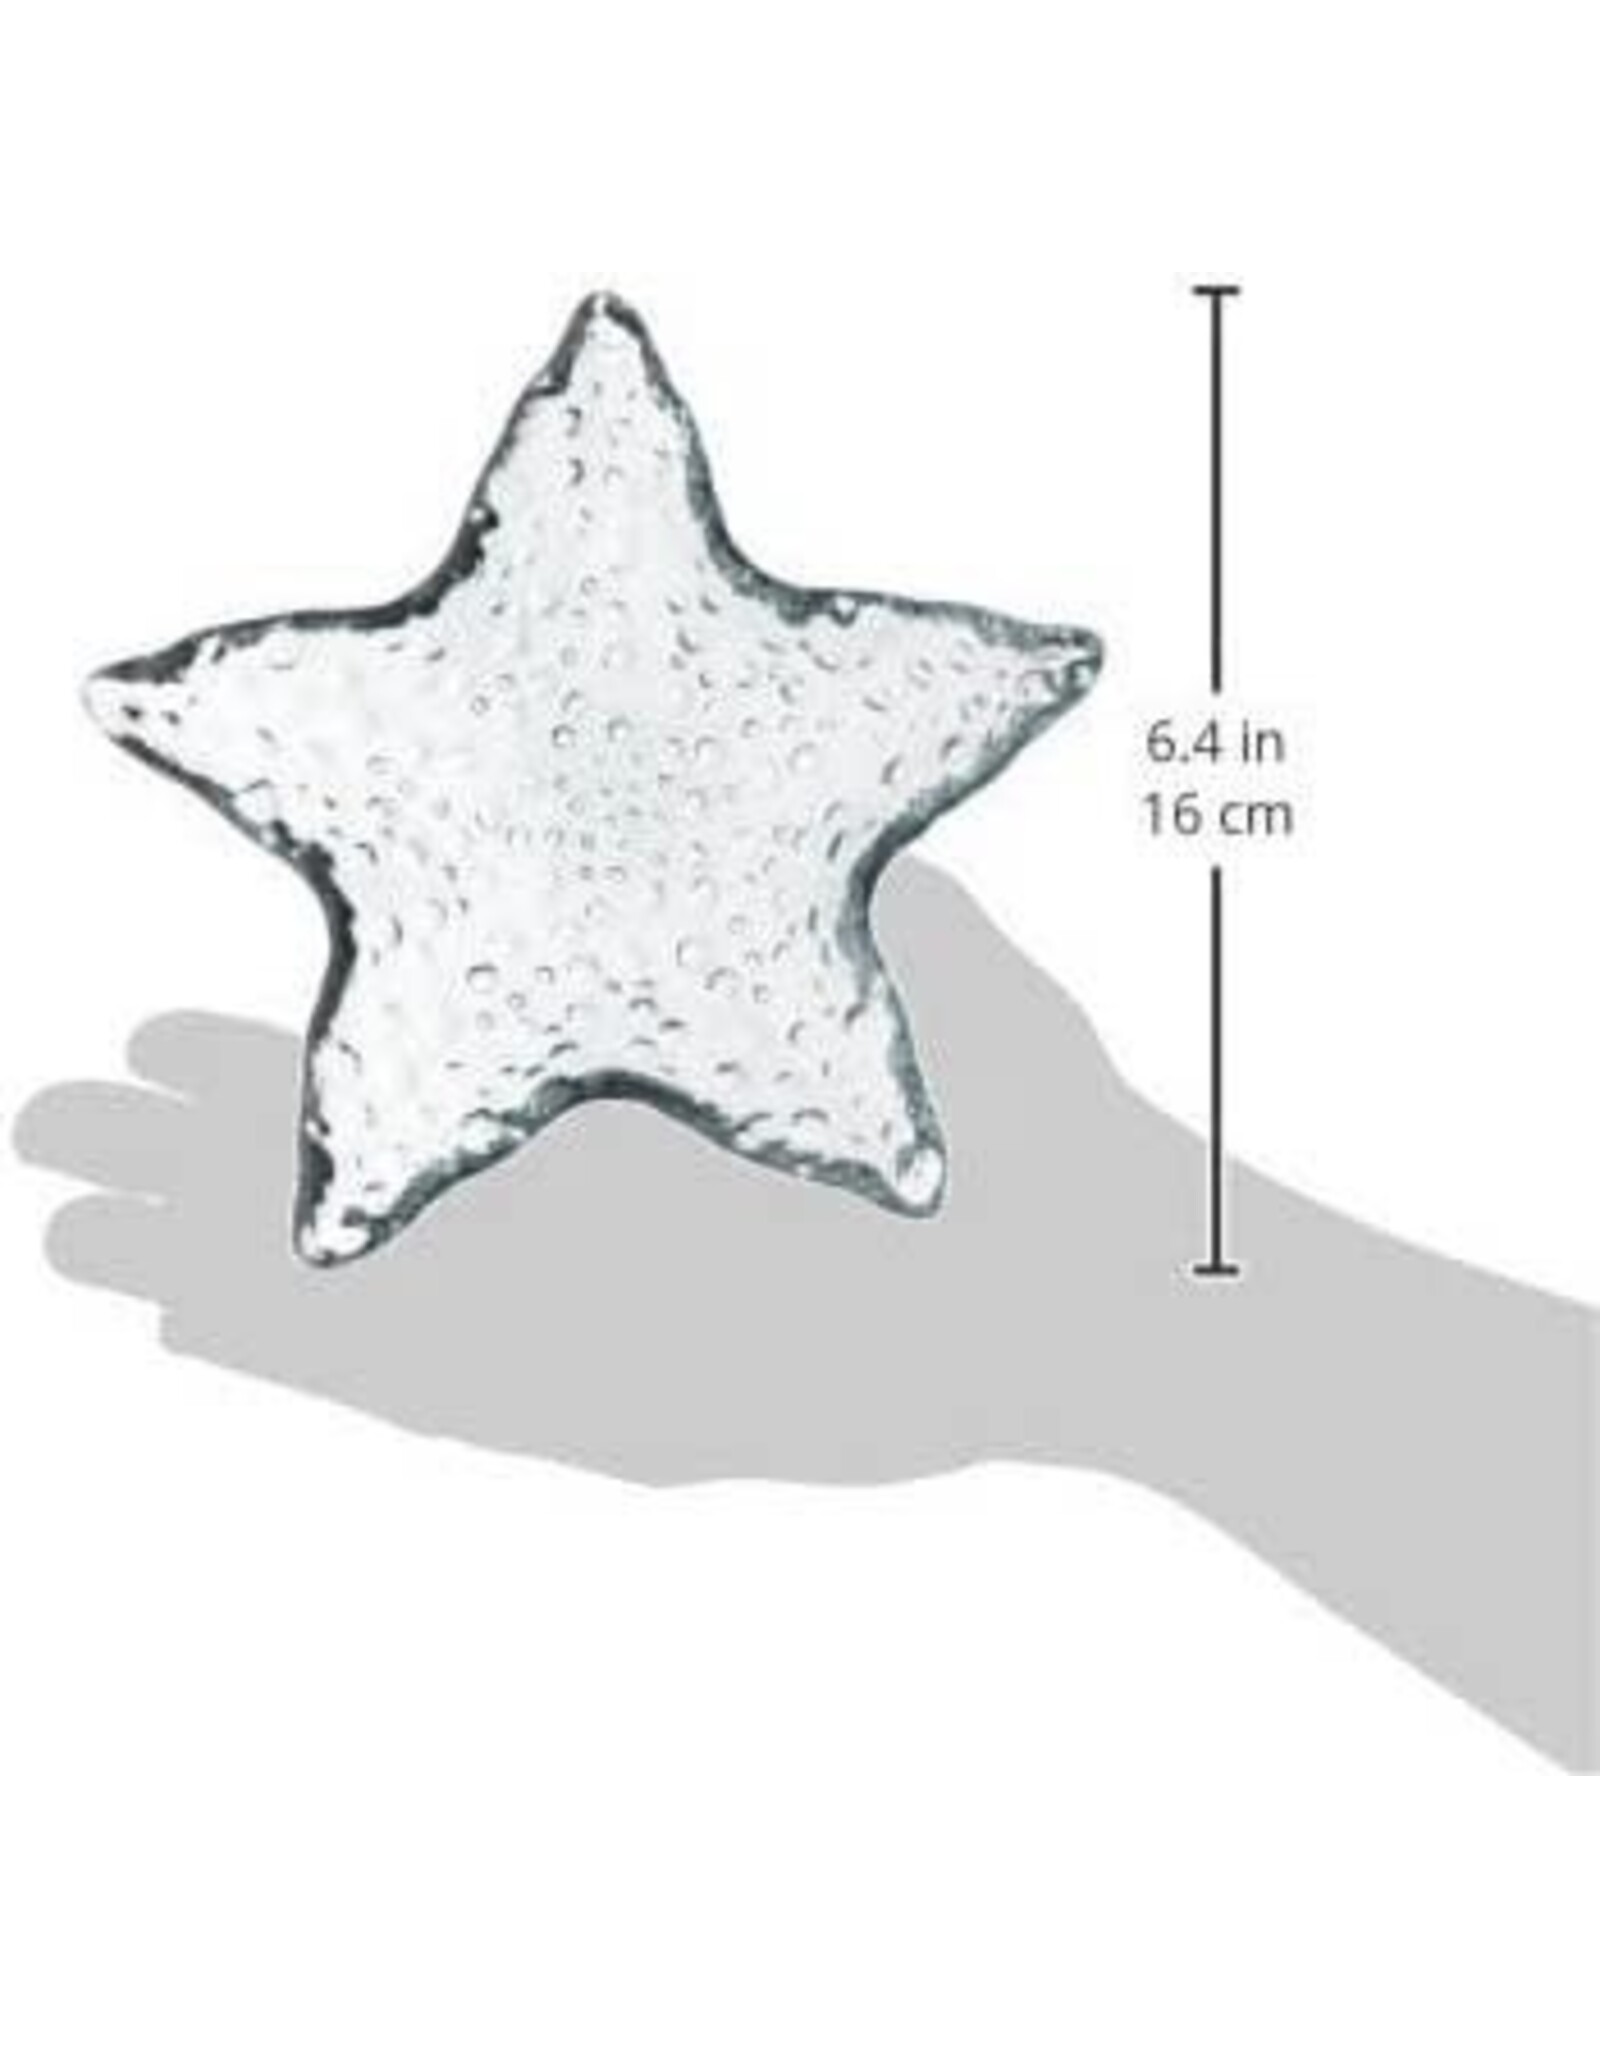 Mud Pie Glass Starfish Dip Cup Small 6x6 inch - Clear